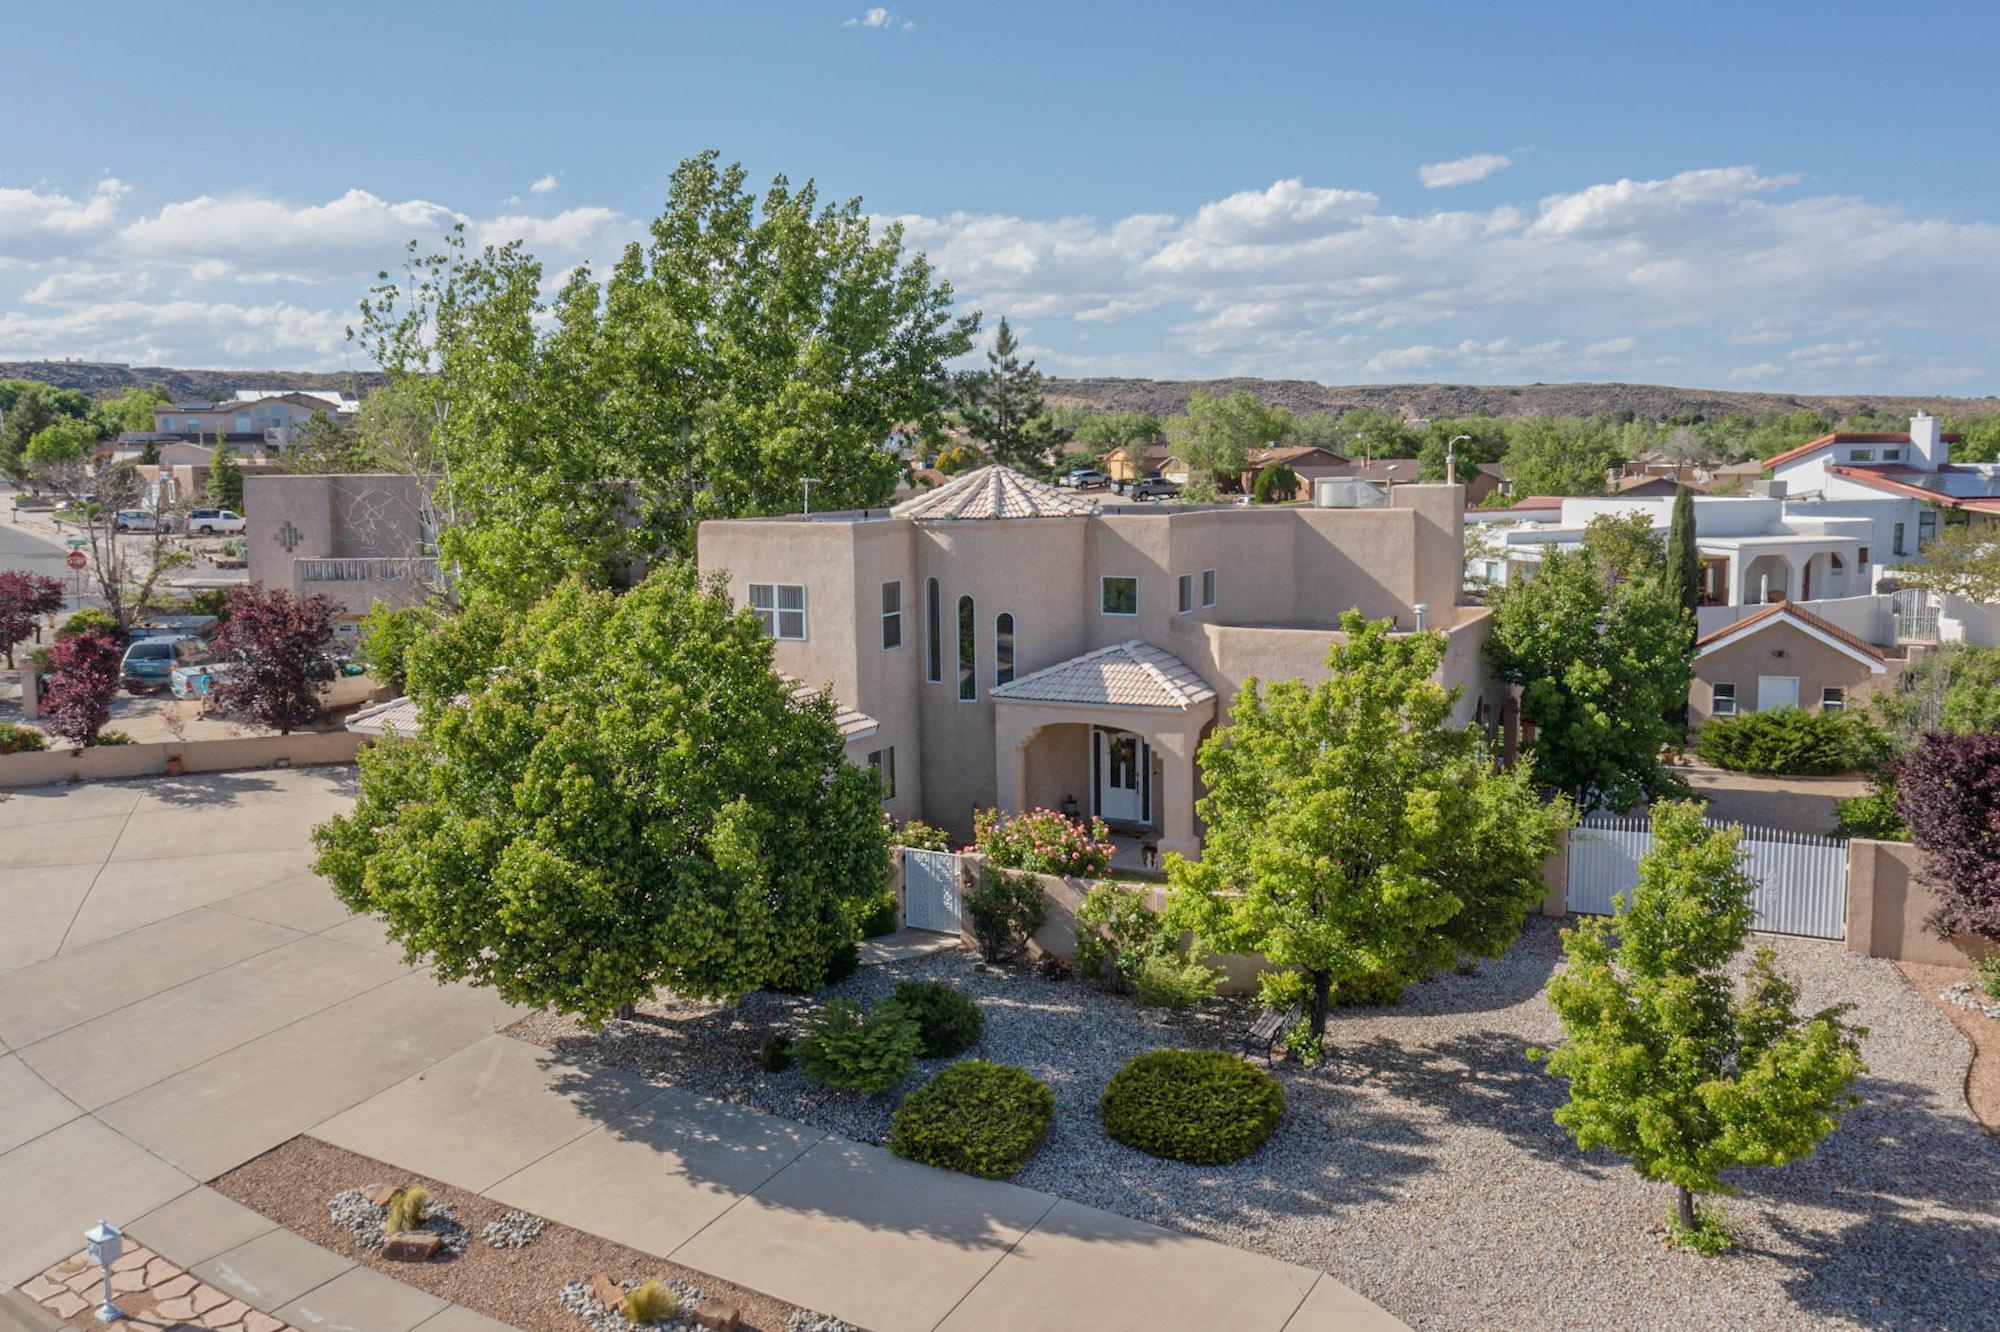 Gorgeous Custom Home nestled on a .31 acre Lot. This 2,953 square foot Home features 5 Bedrooms & 3 Full Baths with Granite Countertops. Primary Suite includes a Deck with Impressive Sandia Mountain & City Views, an Ensuite with Two Vanities, a Jetted Tub, and a Large Walk-in Closet. The Elegant Kitchen showcases Custom Cabinets, Granite Countertops, a Pantry, Stainless Steel Appliances & Double Ovens. Exceptional Features Throughout include Custom Curved Staircase, Medallion Ceilings, Wood Domed Vaulted Ceiling, Deep Nichos with Lighting, Beautiful Arches, Custom Tilework, an Abundance of Storage, Multiple Outdoor Living Areas, Off Street Parking for 12+ Vehicles & Backyard RV Access, and a Large Workshop or Potential Casita with Electricity & Sewer. Close to scenic Petroglyph Hiking Tra